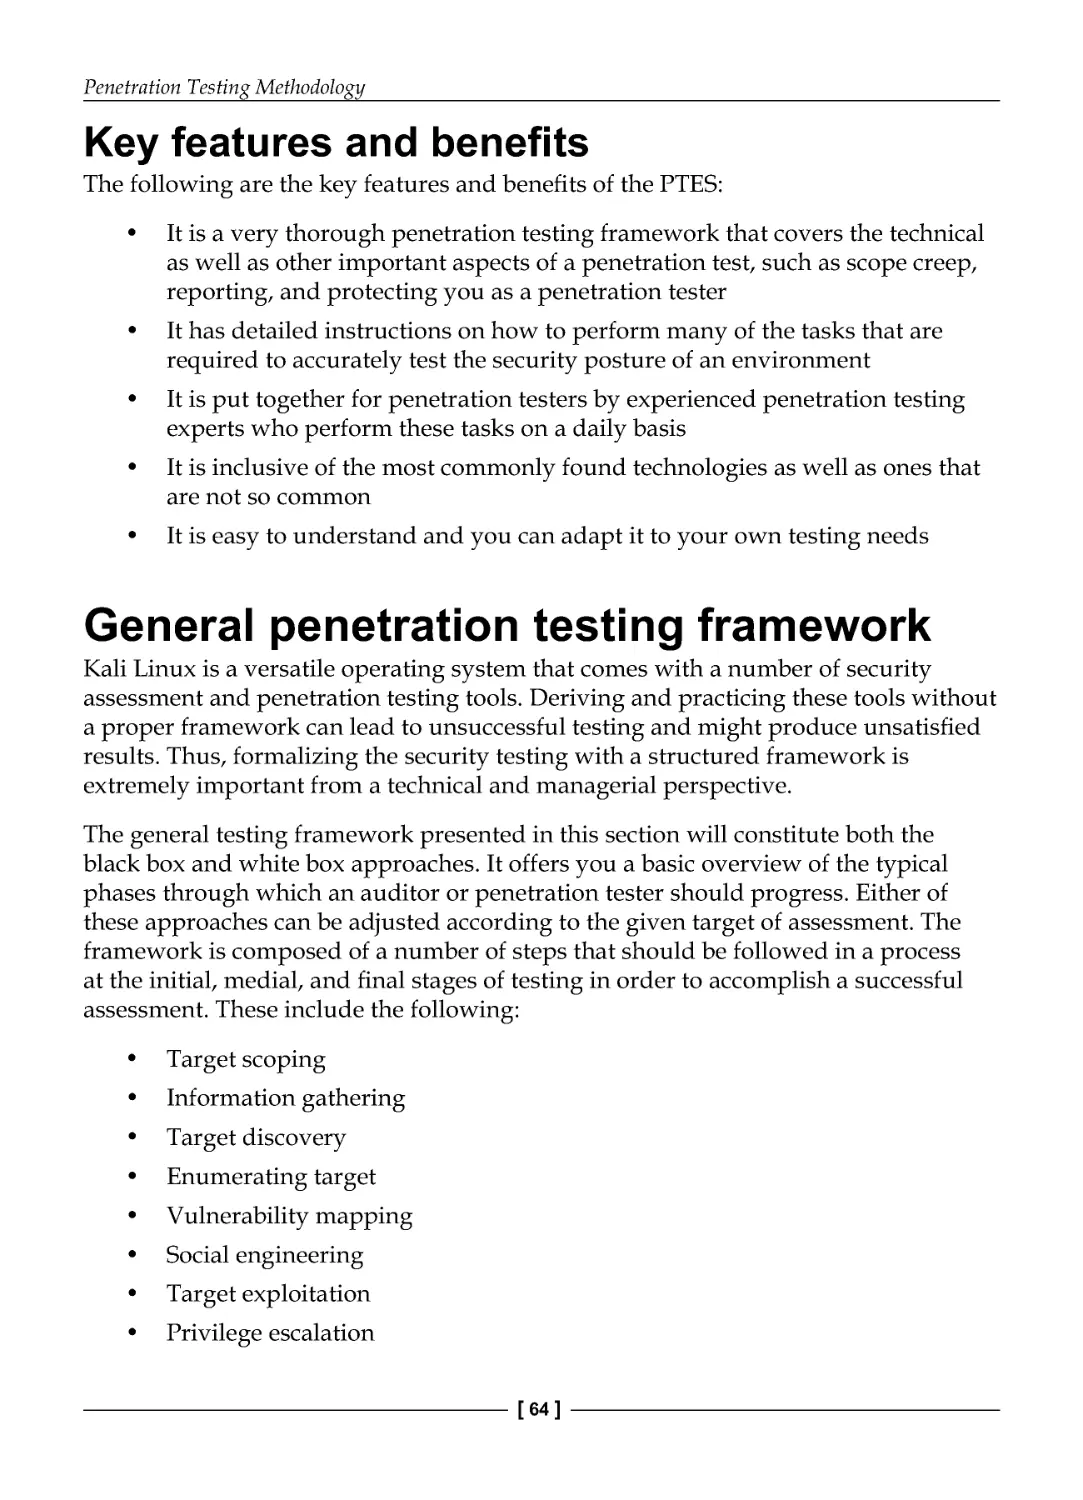 Key features and benefits
General penetration testing framework